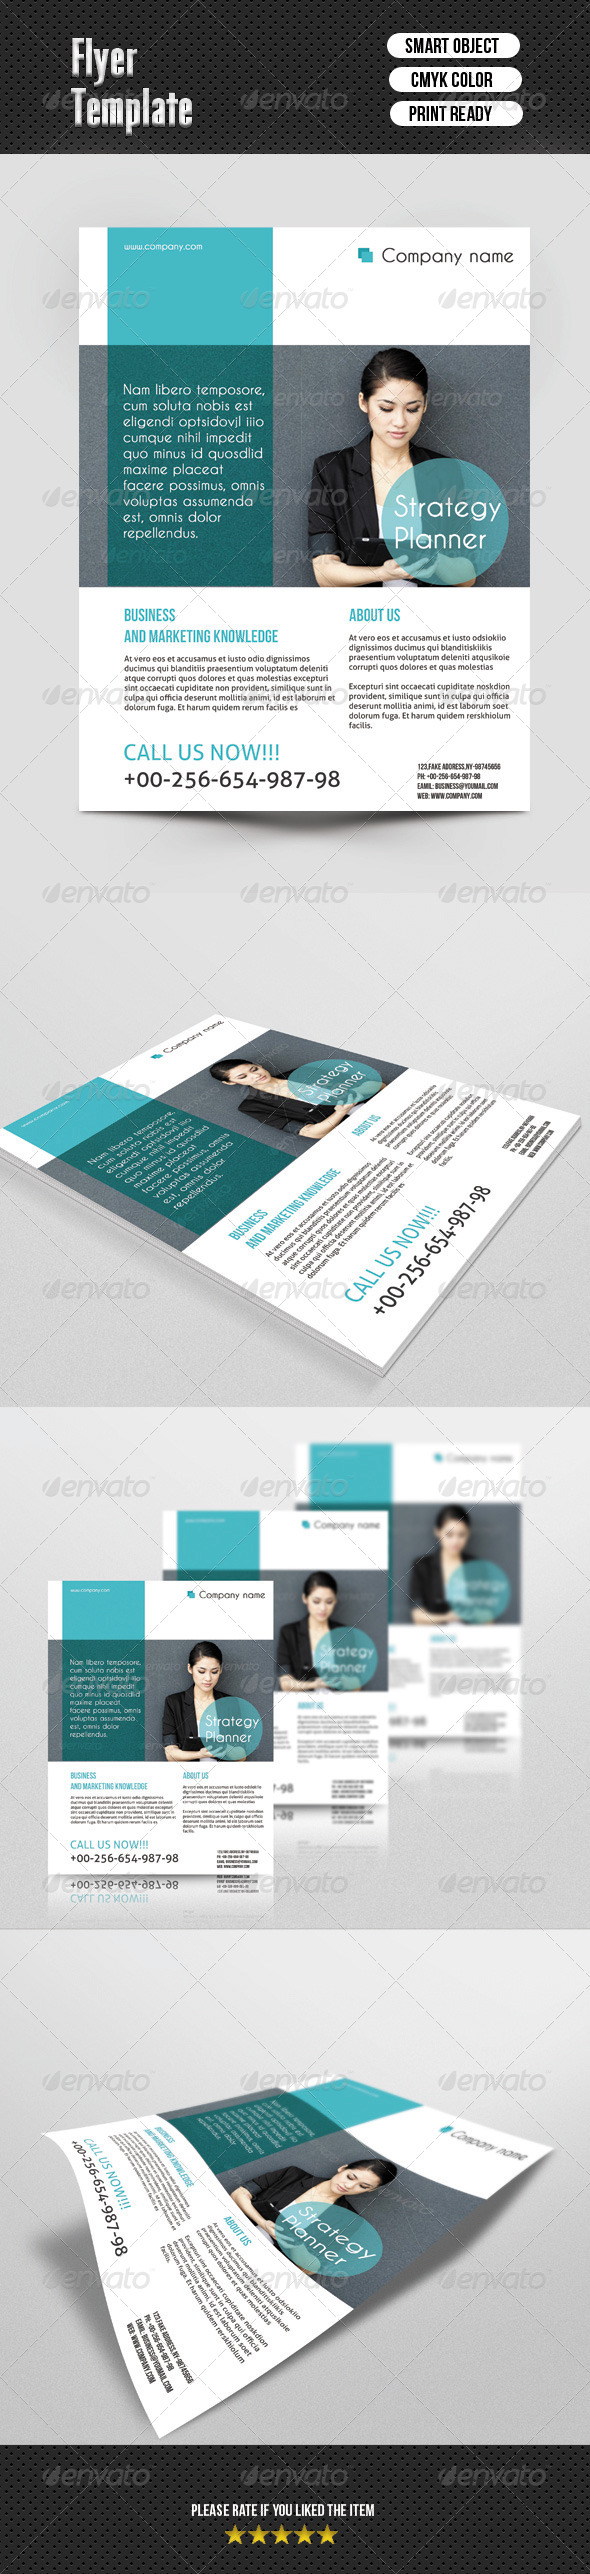 Busines Flayer Template (Corporate)